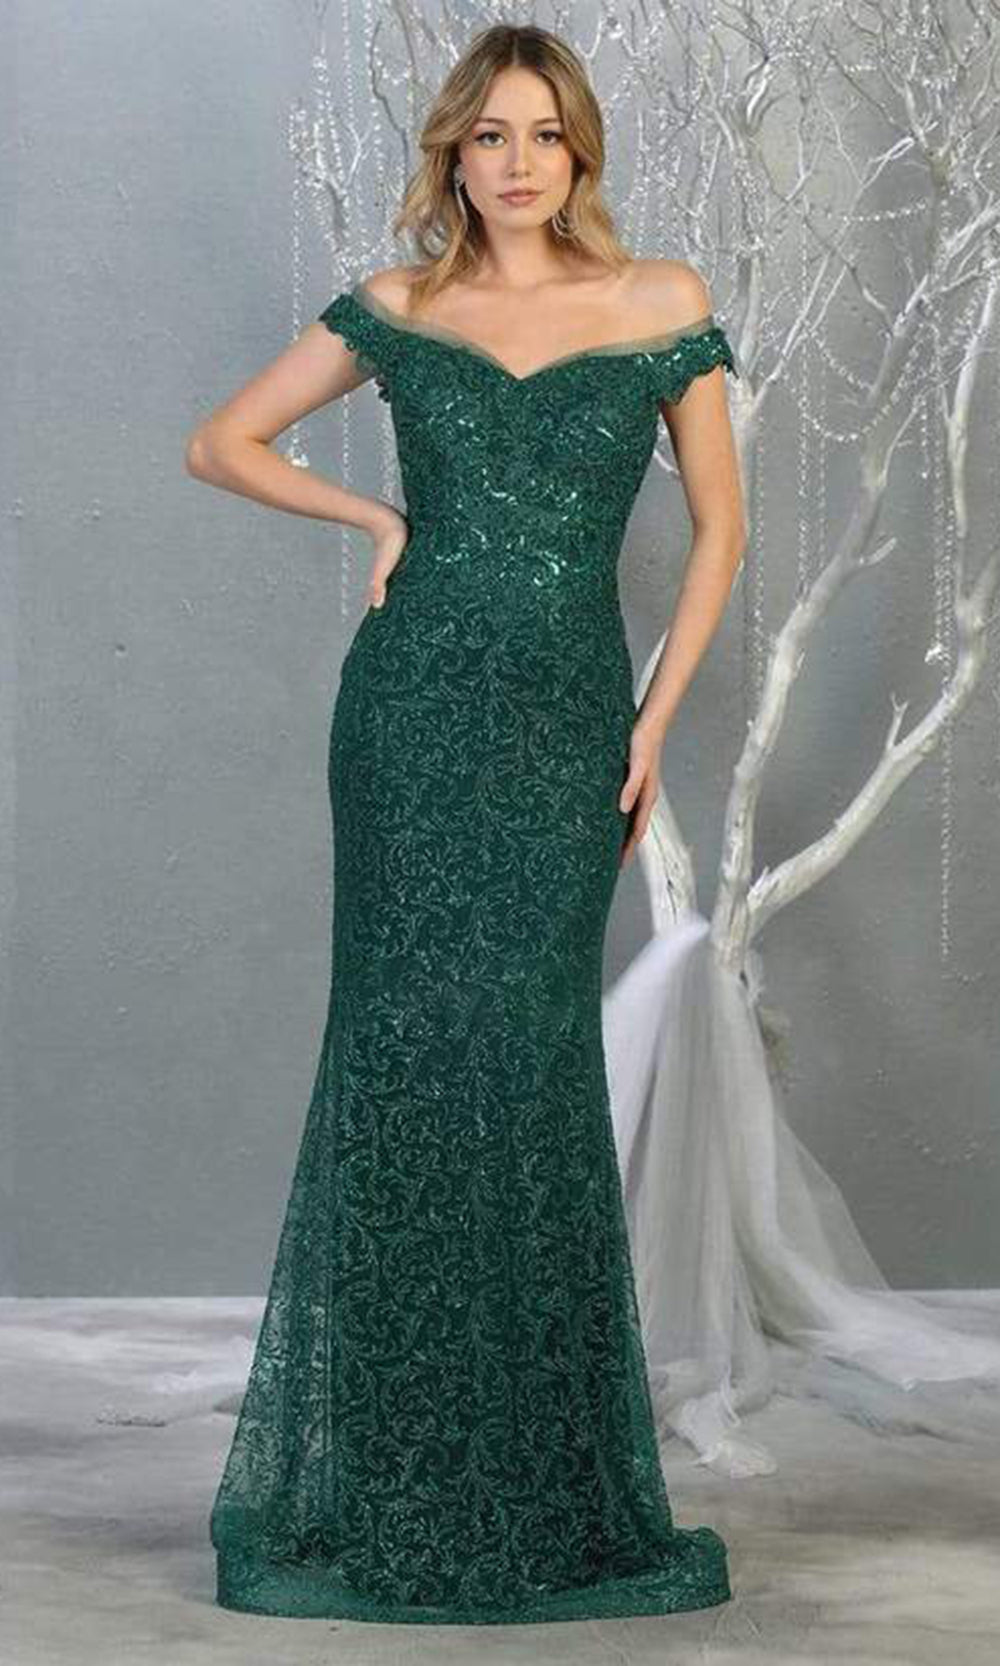 May Queen - RQ7879SC Off Shoulder Striking Embellished Sheath Gown In Green